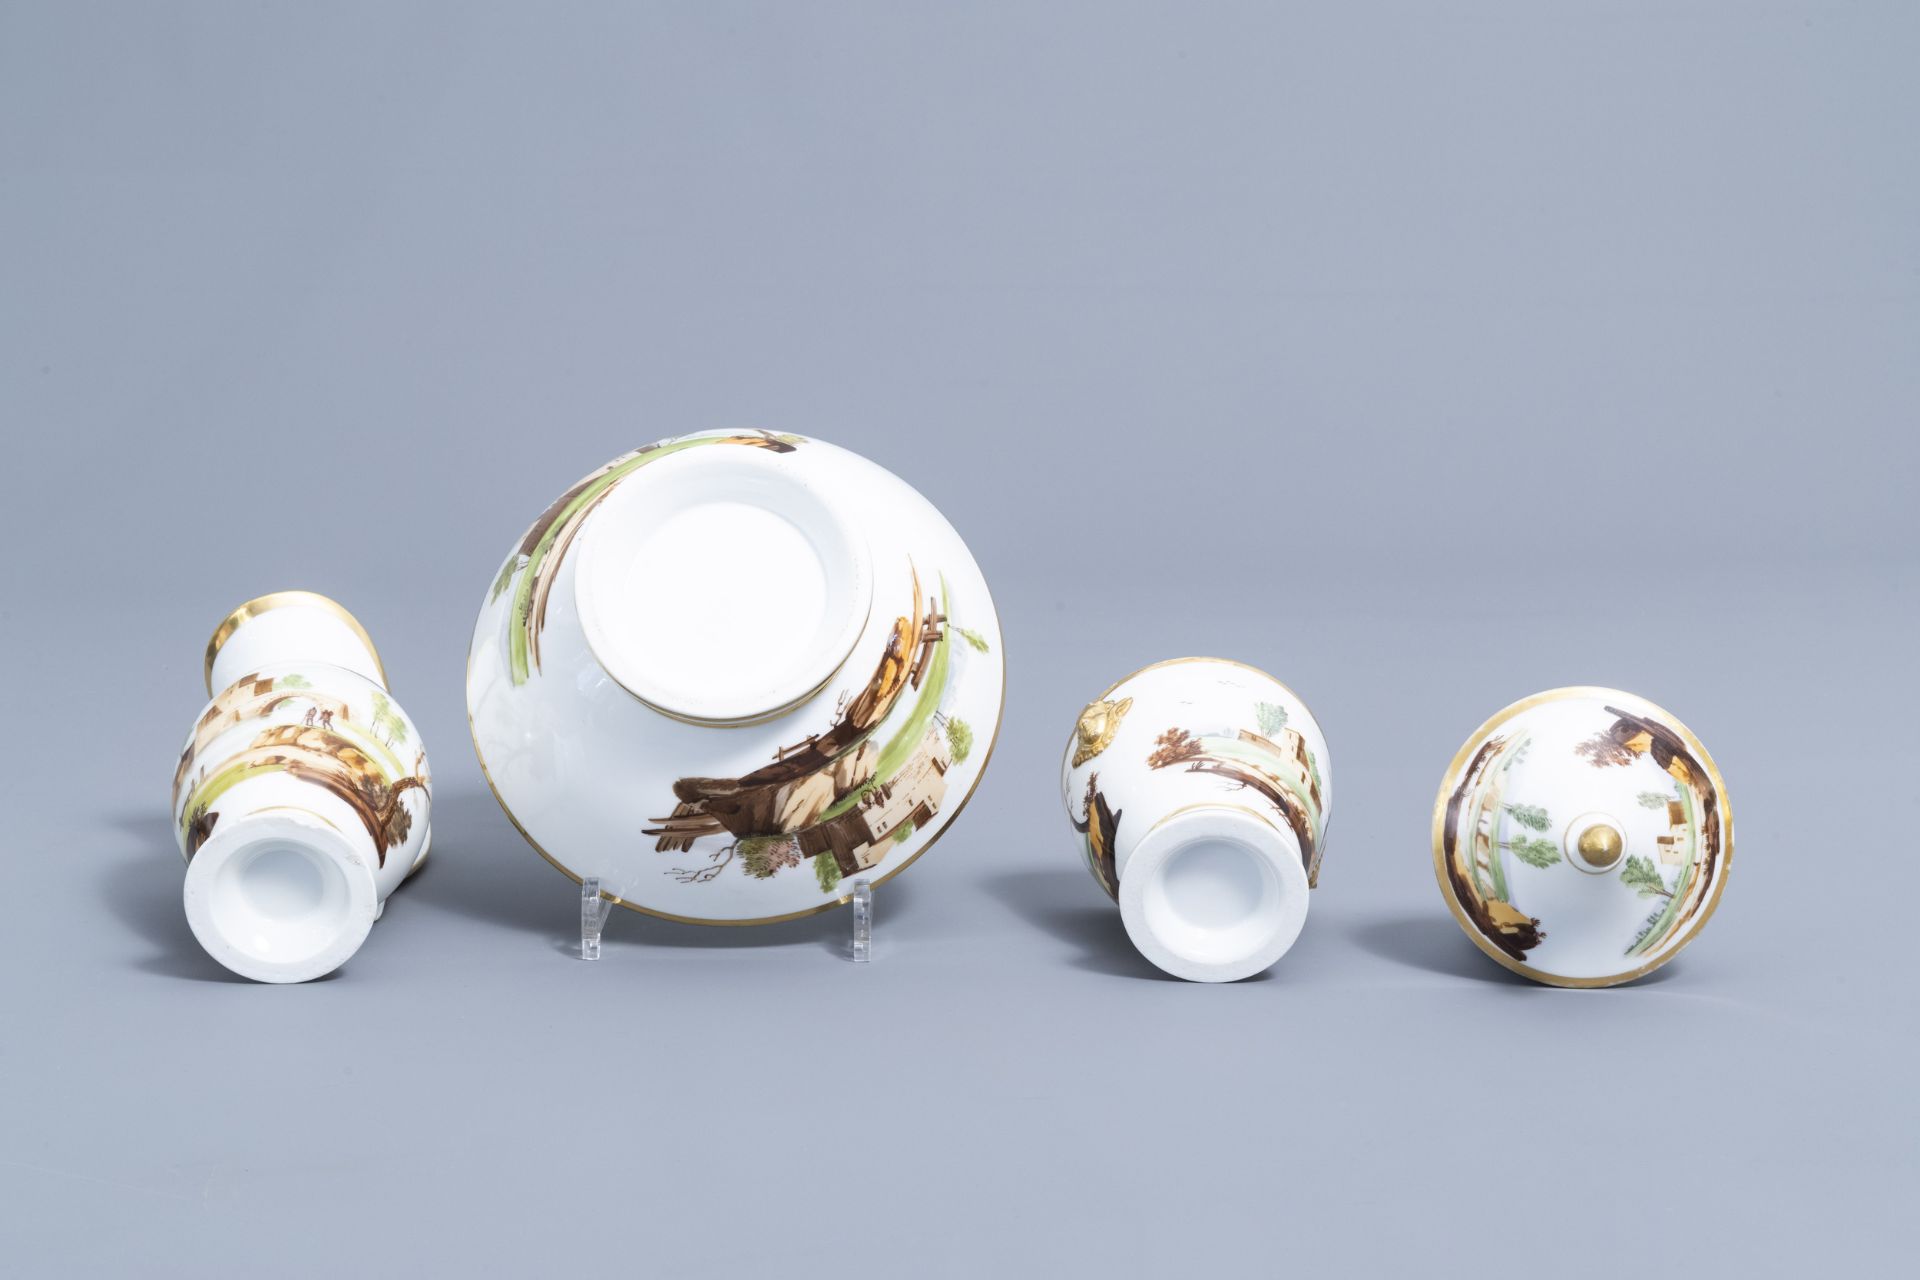 A 21-piece Paris polychrome and gilt porcelain coffee and tea service with landscapes, 19th C. - Image 25 of 46